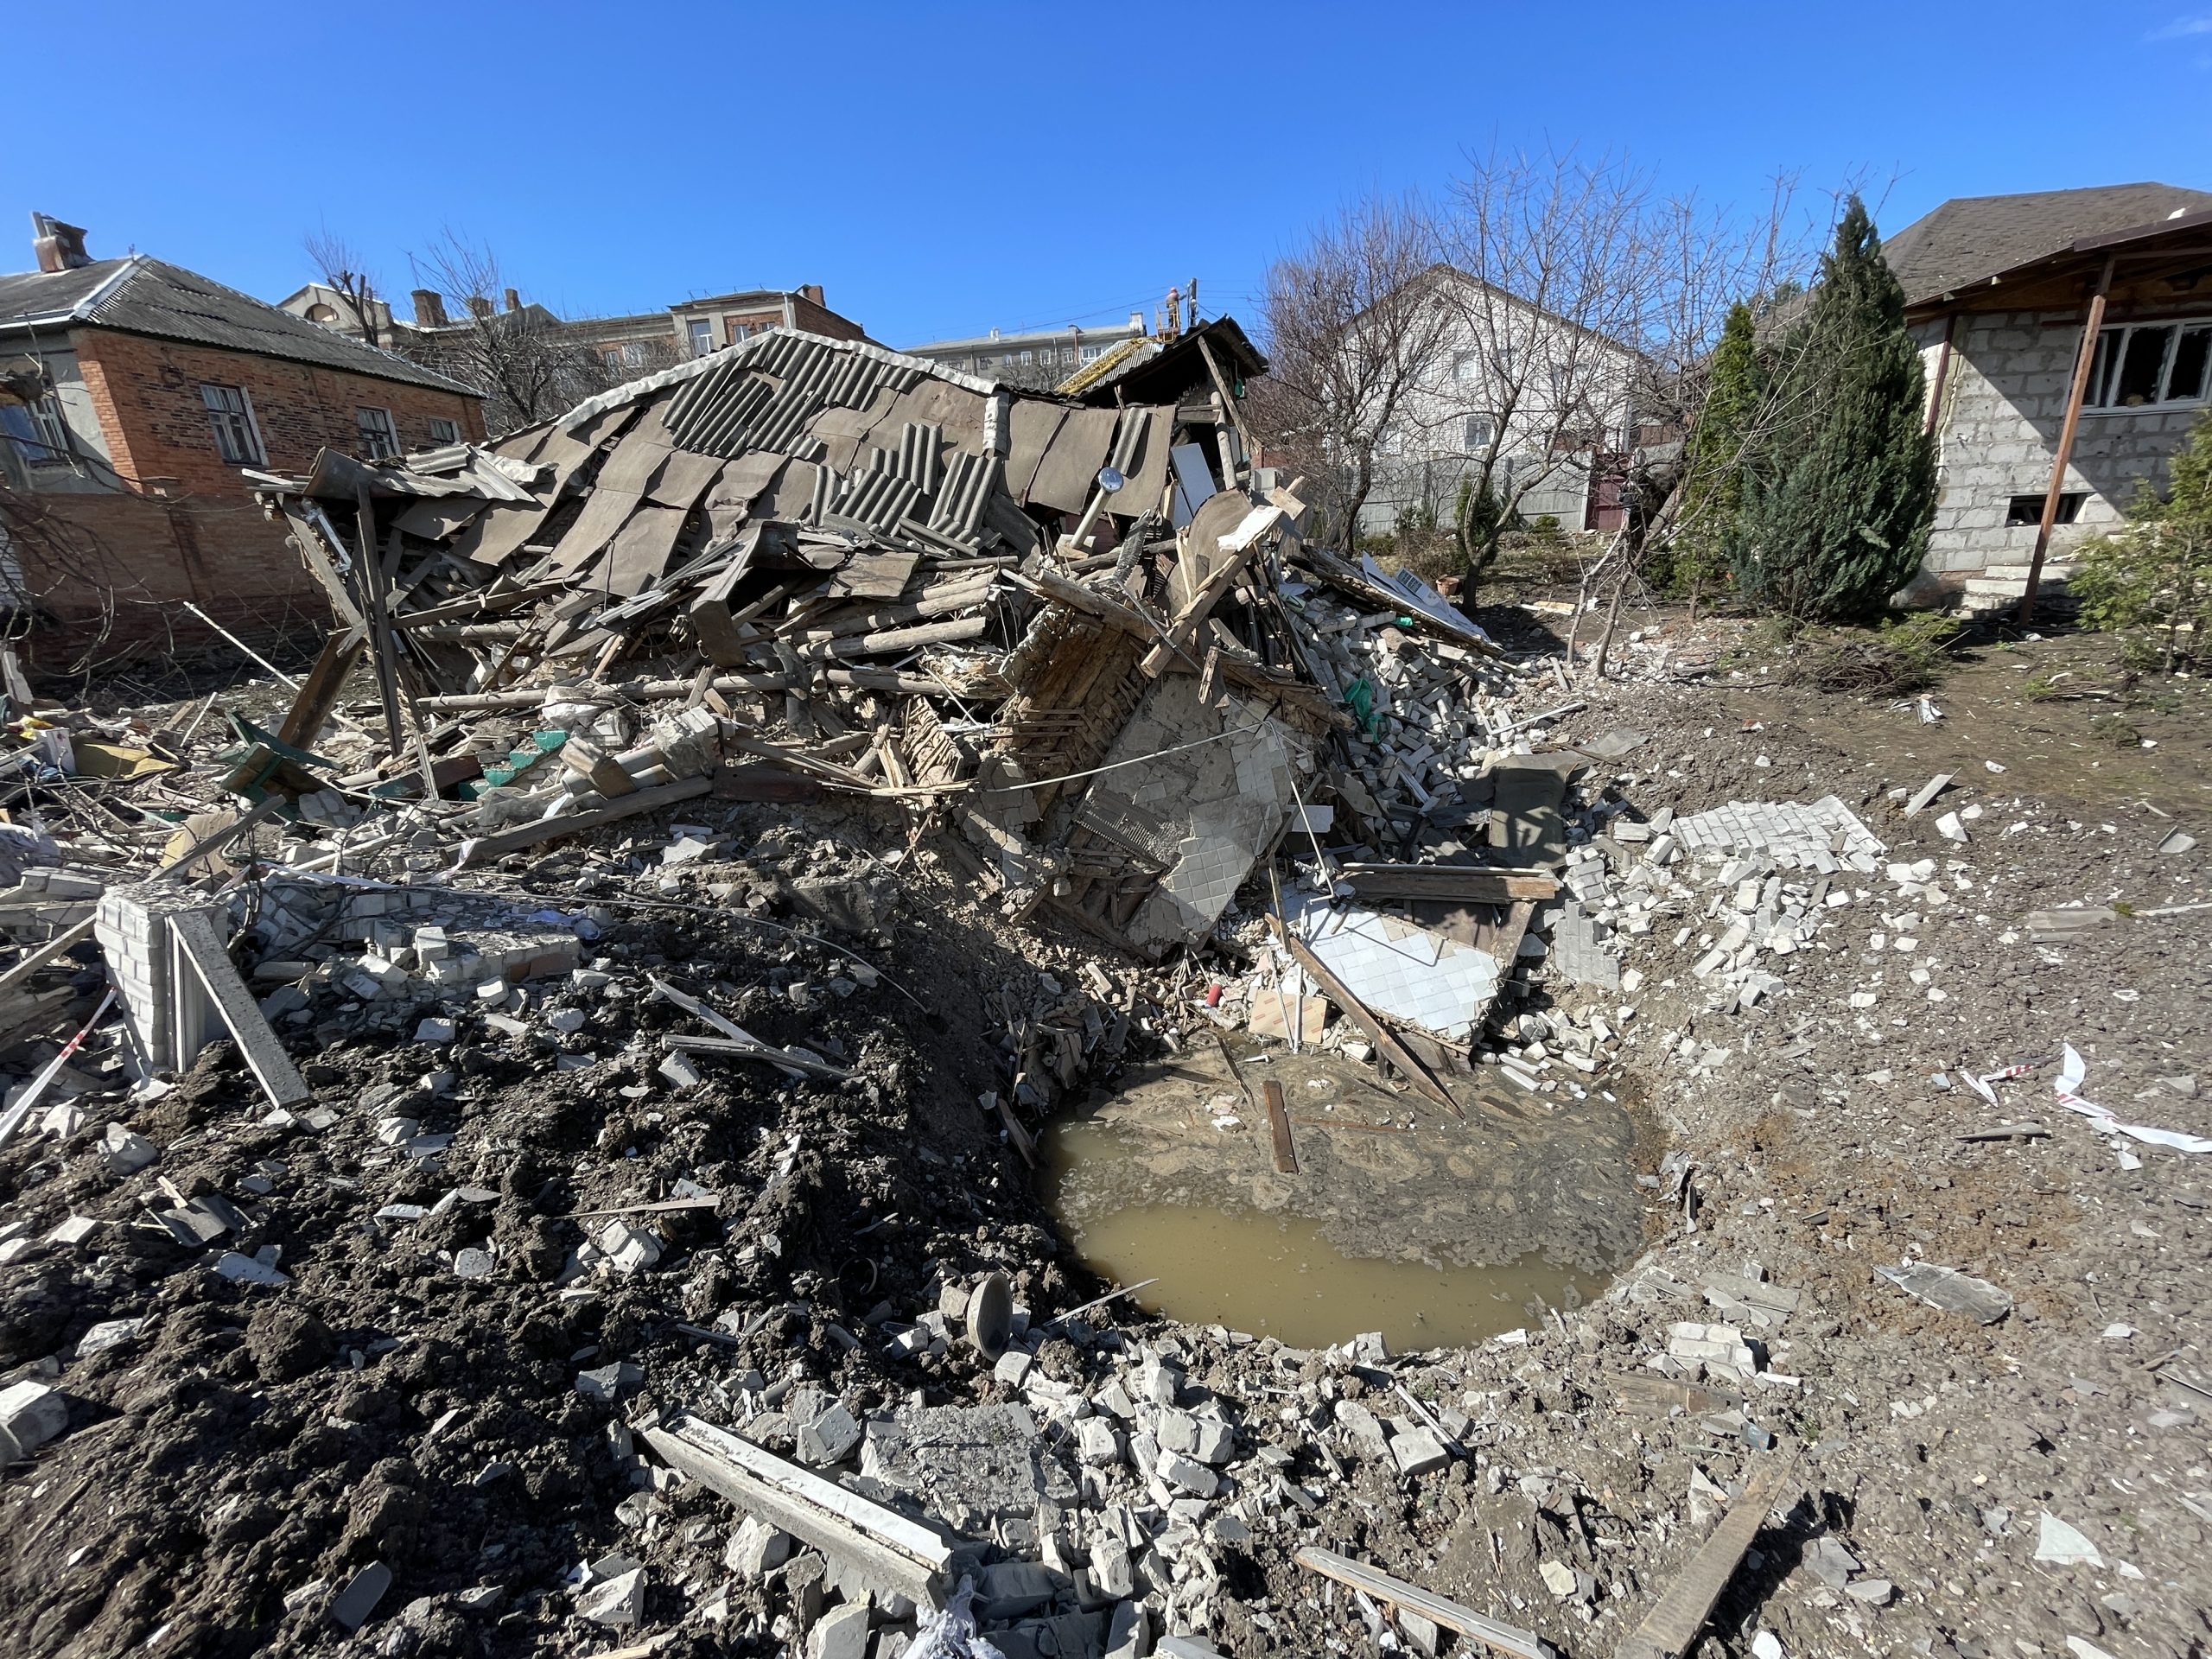 Kharkiv. A private house in a district with the historical name “New Bavaria” destroyed by a rocket. Photo was taken on March 31, 2023 by Yevhen Tytarenko